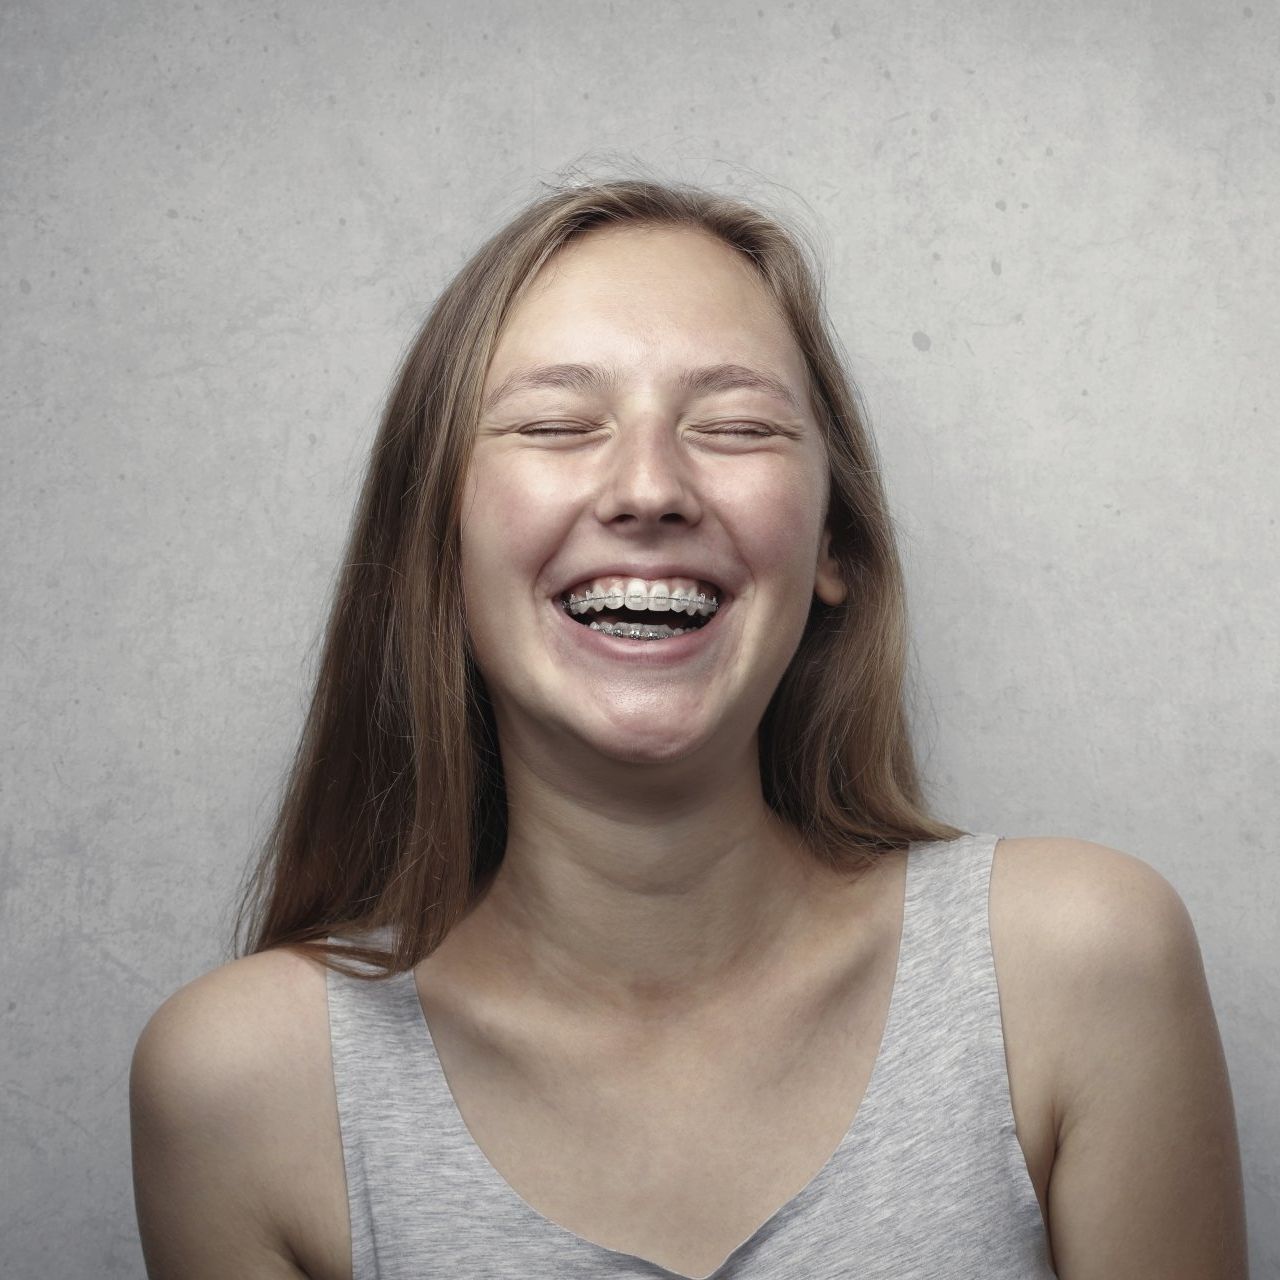 Teenage girl with braces, eyes closed, laughing